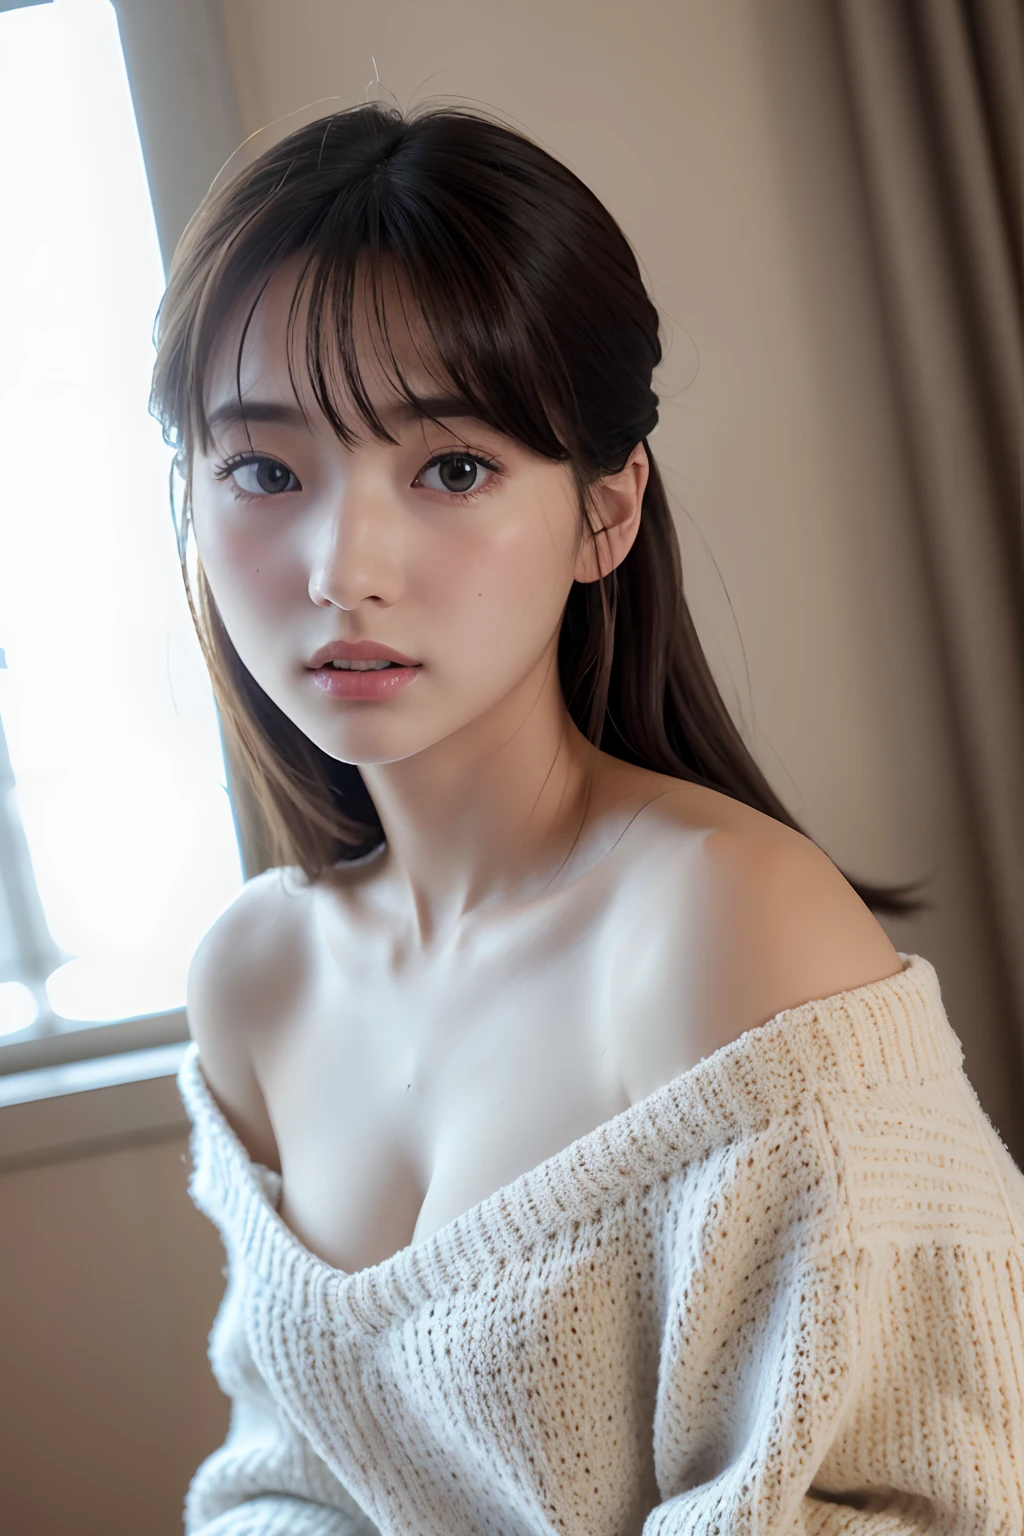 (8K)、(top-quality)、(masuter piece:1.2)、(realisitic)、(Photorealsitic:1.37)、ultra-detailliert、女の子 1 人、looking looking at viewer、cleavage of the breast、Off-the-shoulder clothing、Very large sweater